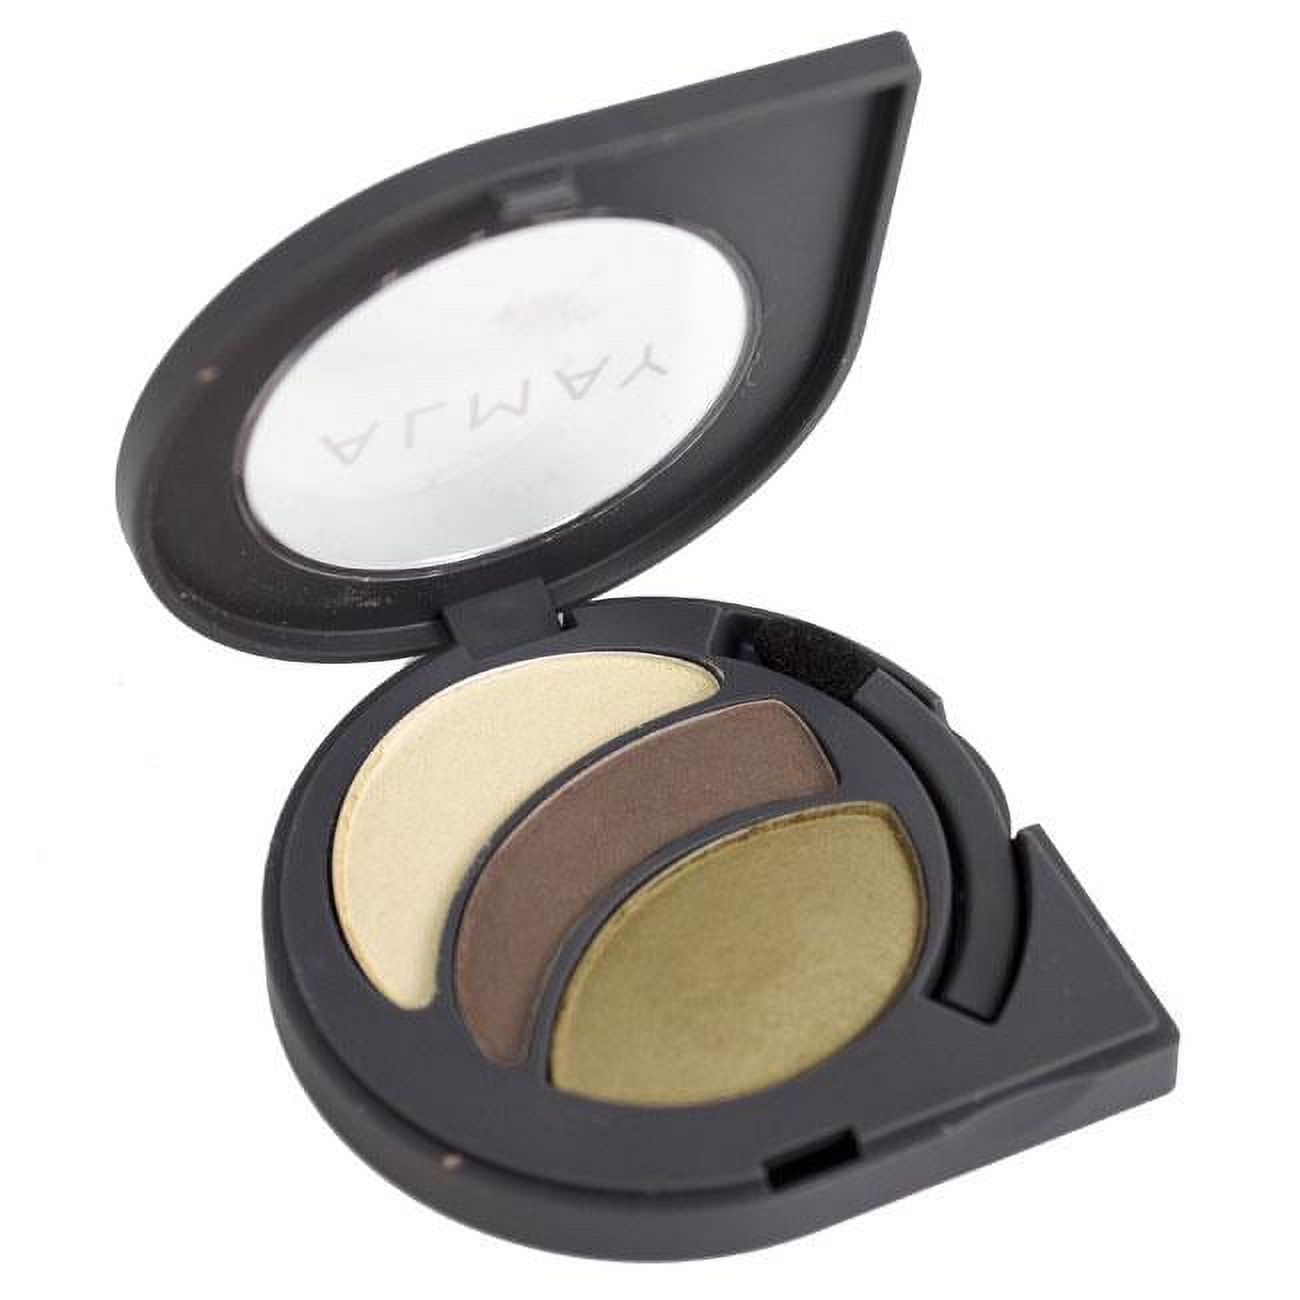 Almay Intense I-Color Everyday Neutrals All Day Wear Powder Eye Shadow, For Brown Eyes - image 5 of 6